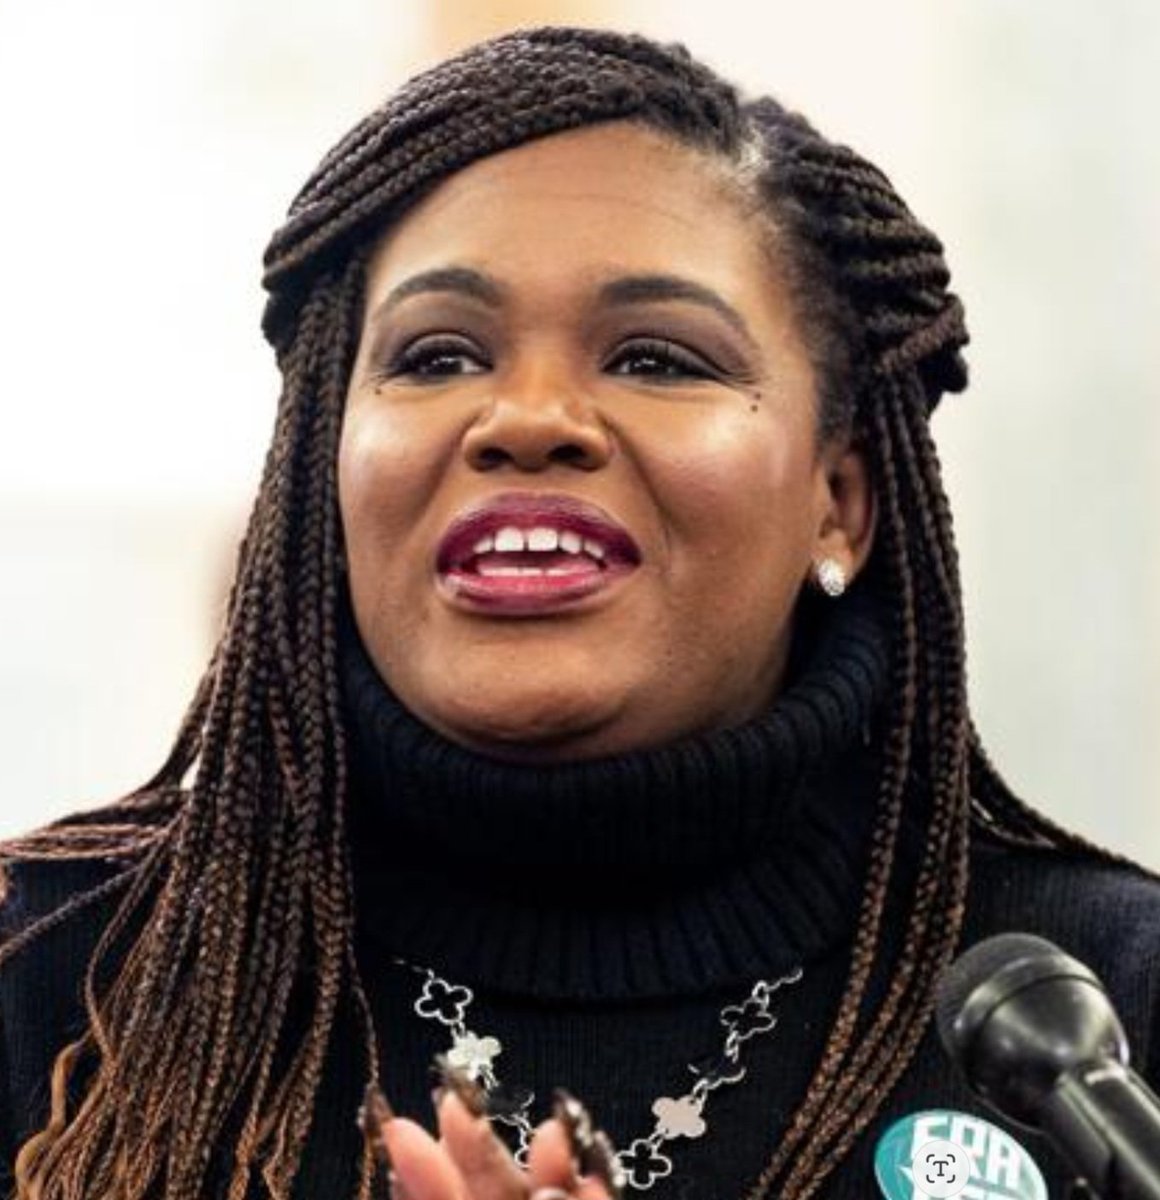 It's Time For Social & Economic Justice For All. It's Time For Change We Can Feel. That's what Democratic Representative (MO-01) Cori Bush's coribush.org reelection campaign is all about! Let's help Cori win reelection! #DemVoice1 #VoteBIGBlue